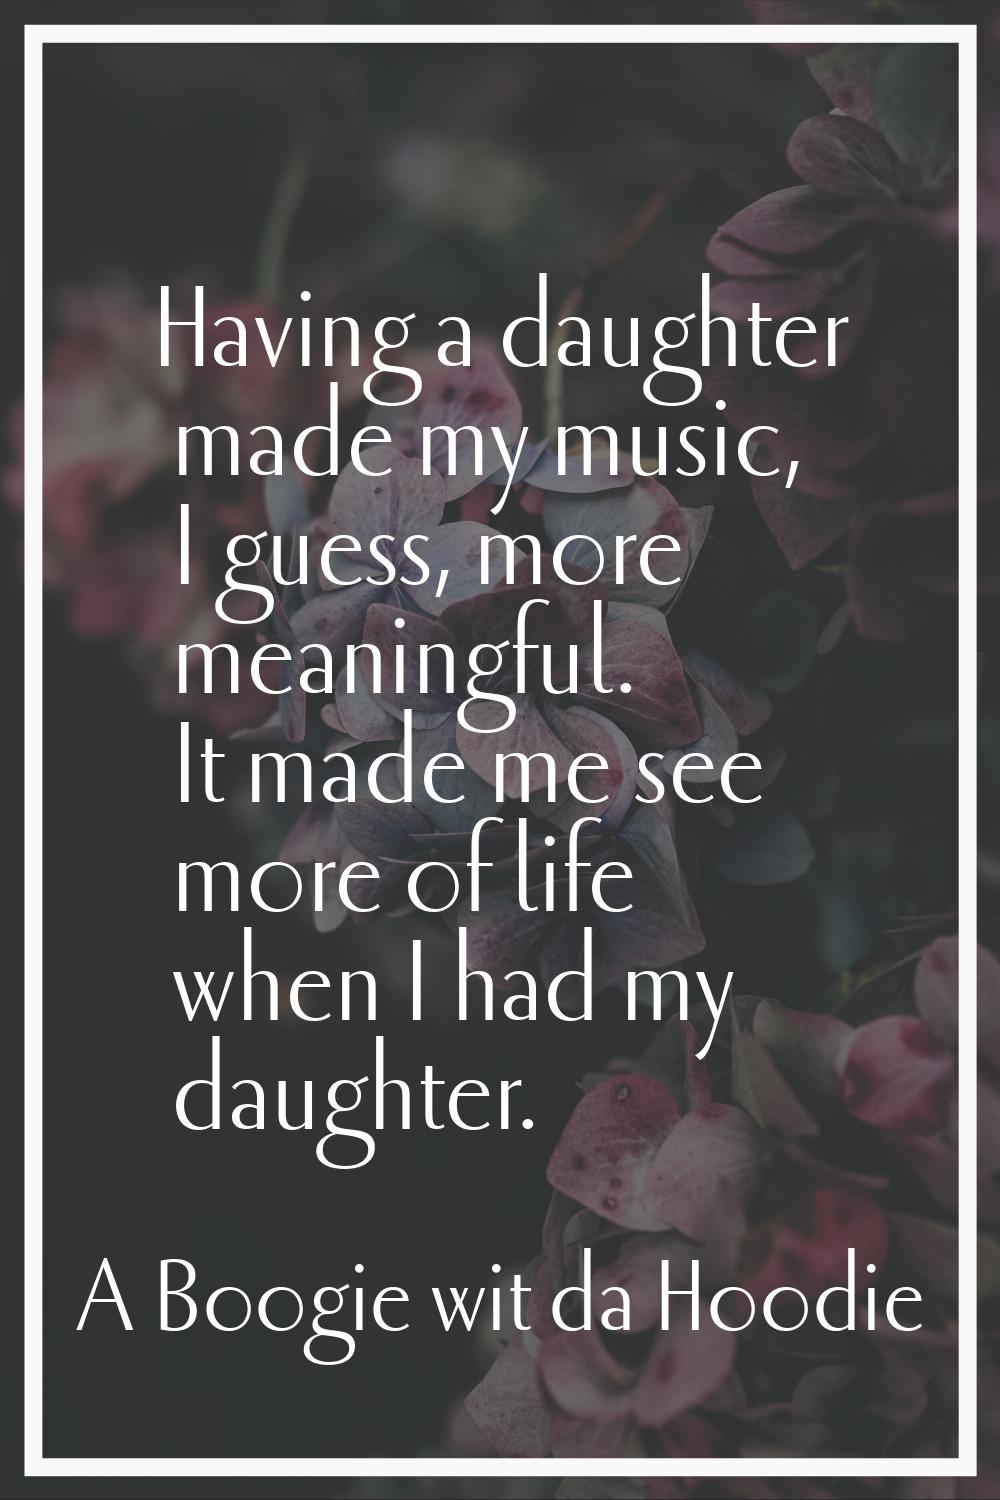 Having a daughter made my music, I guess, more meaningful. It made me see more of life when I had m